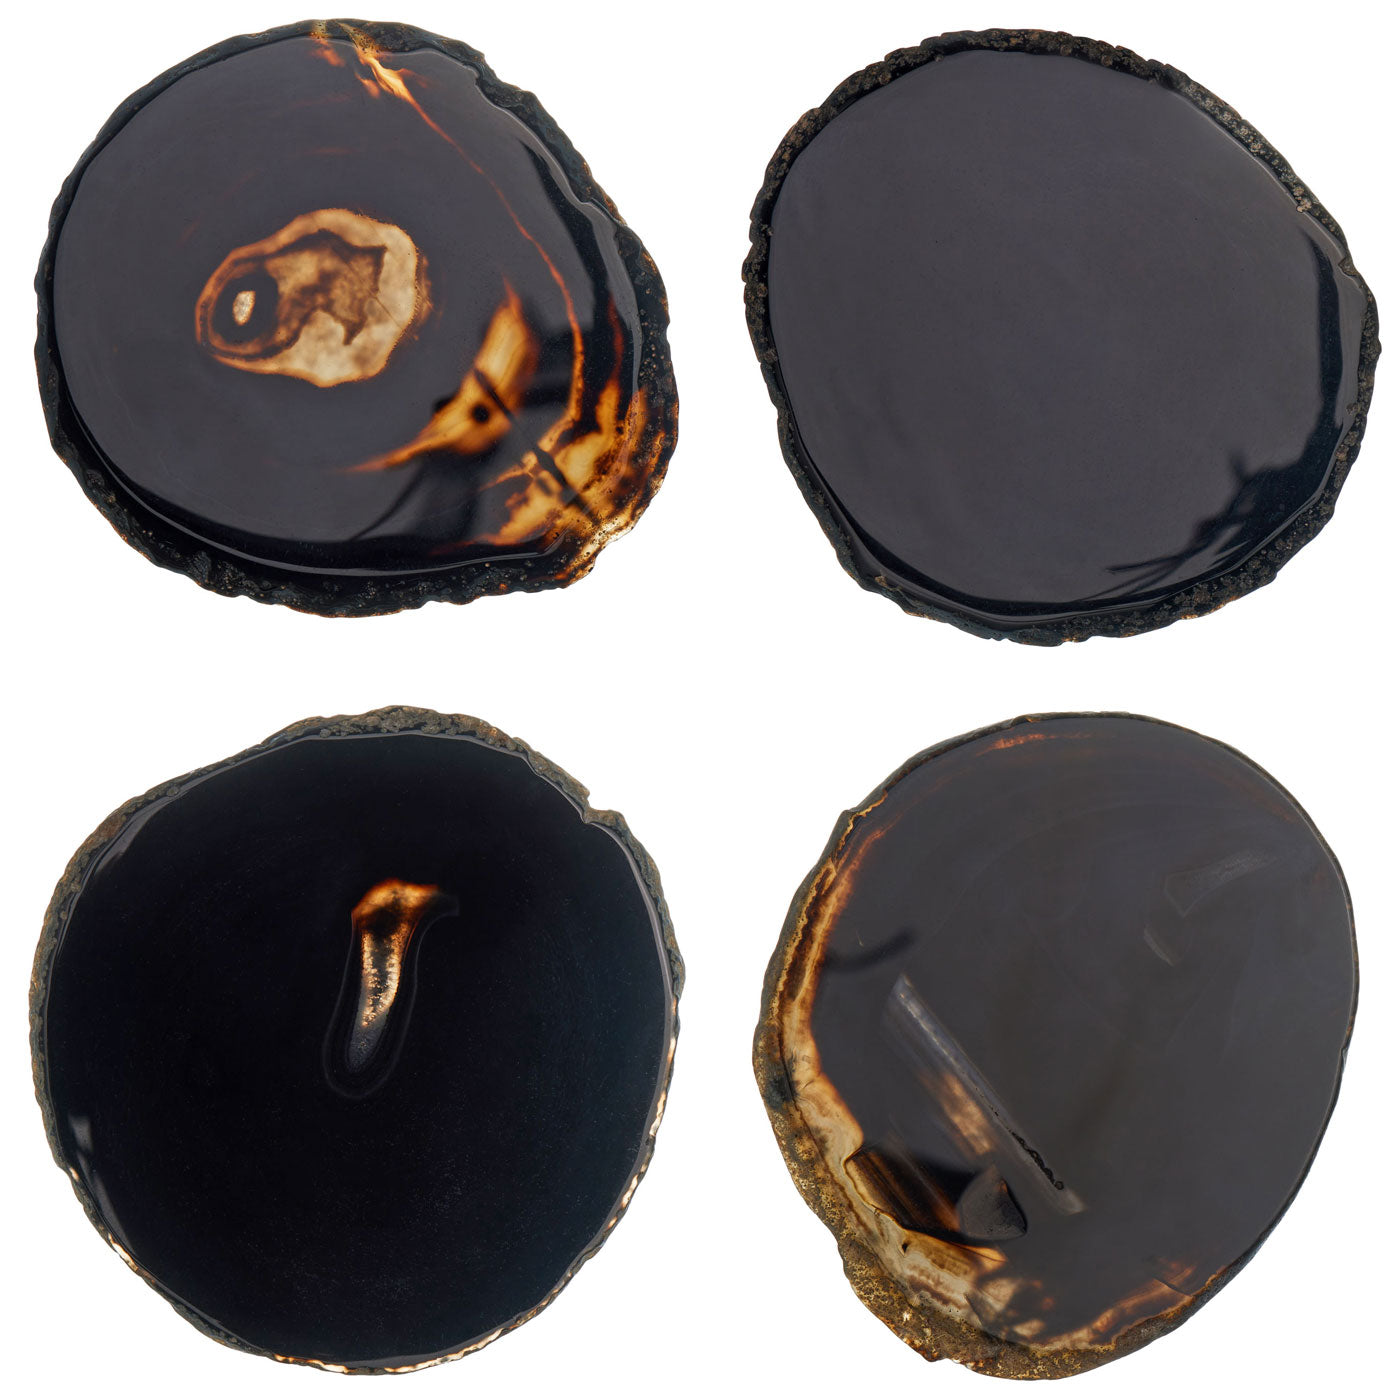 Set of 4 Natural Brazilian Agate Drink Coasters with Wood Holder - Black